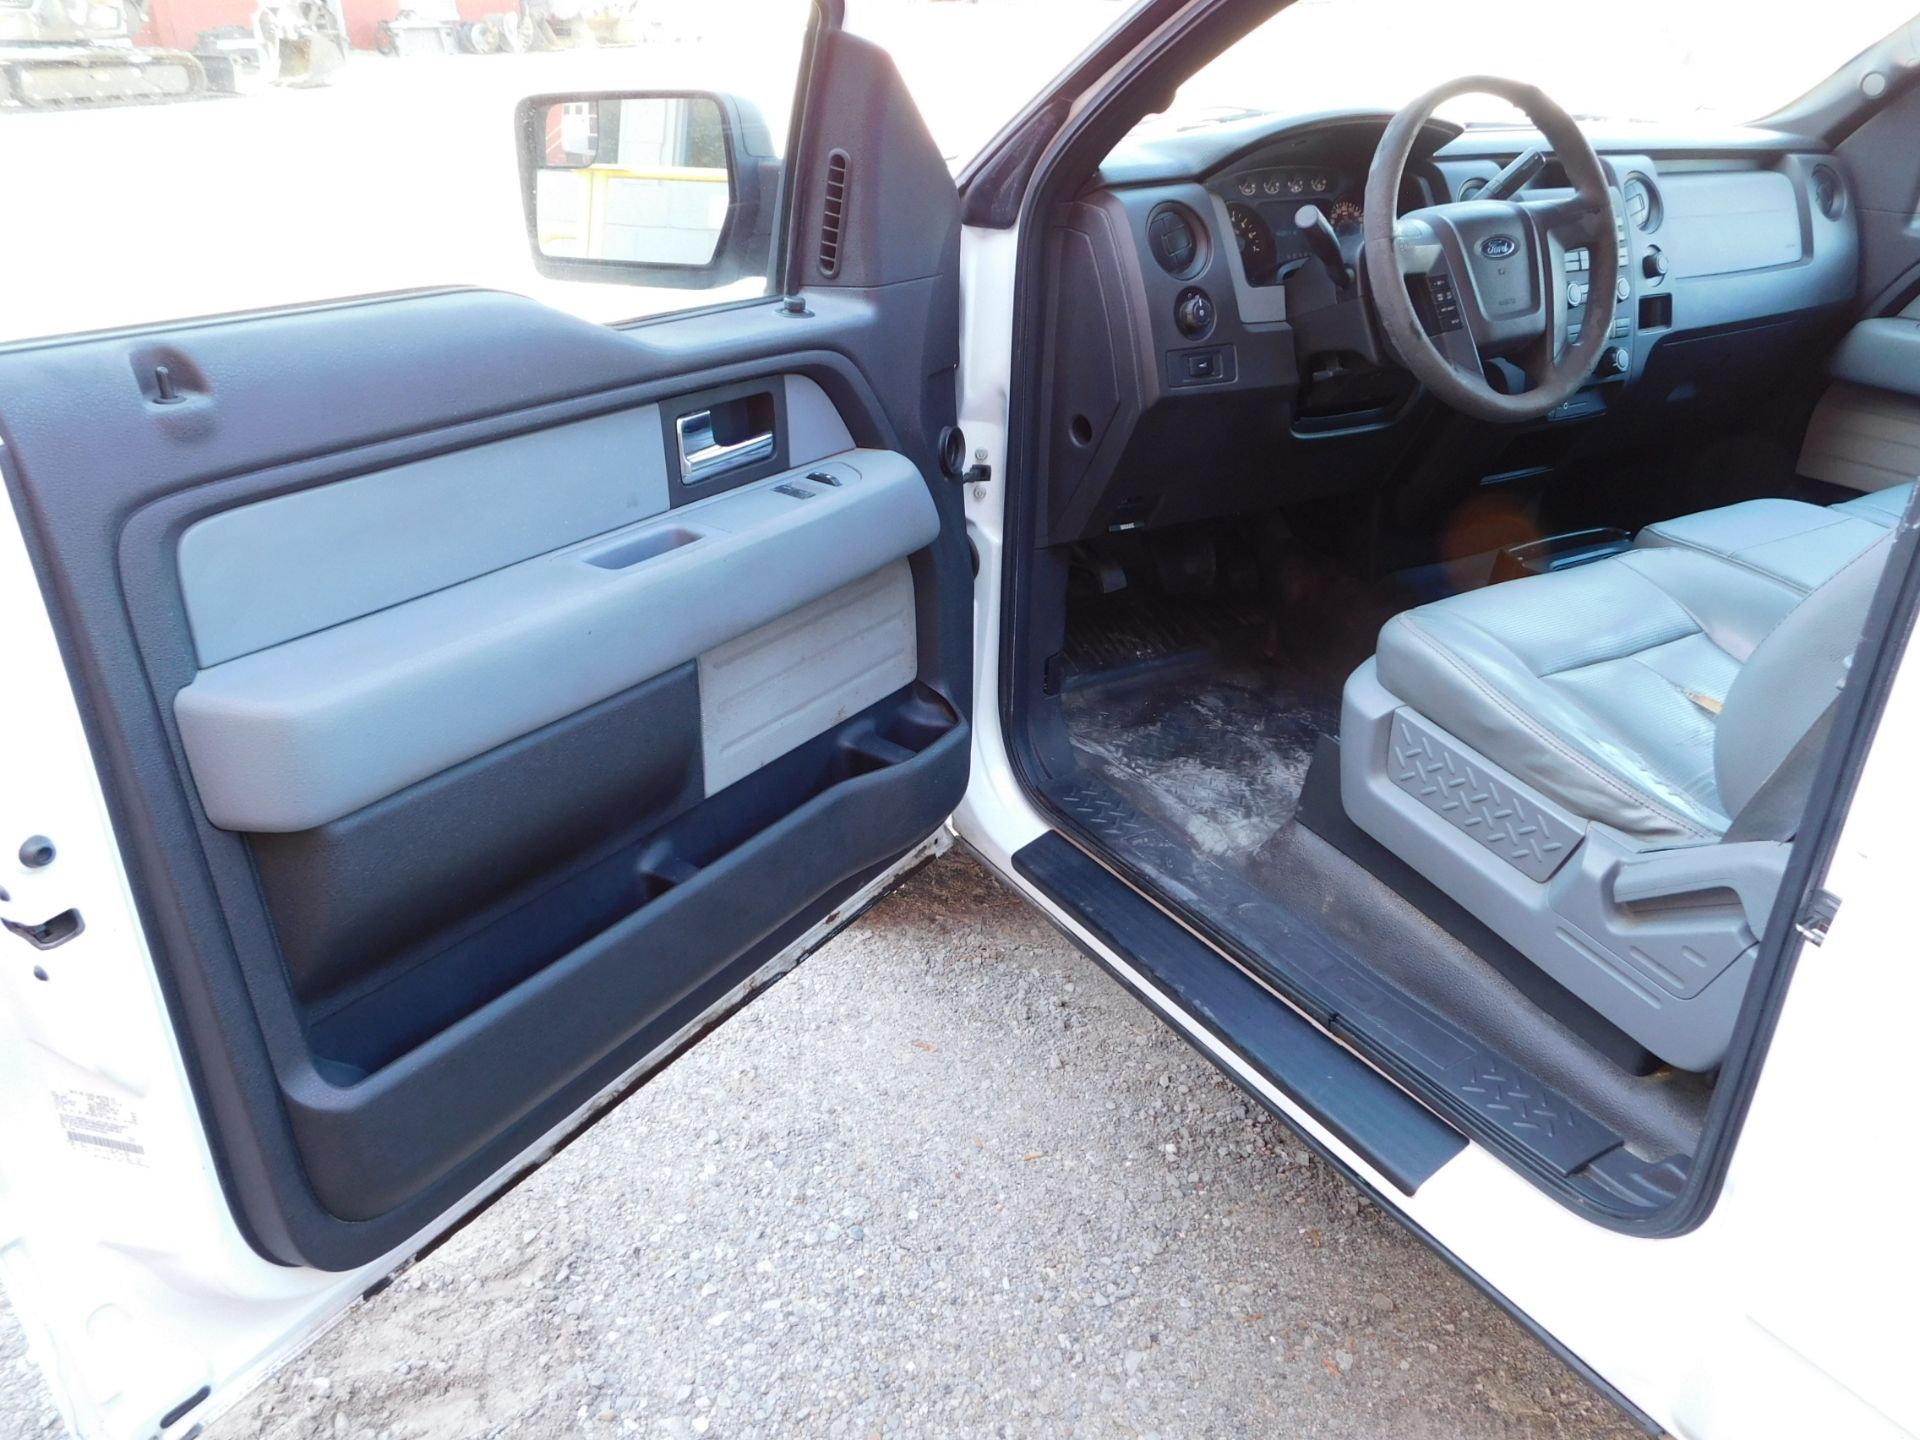 2011 Ford Pick up F-150XL vin 1FTMF1CM3CKD12942, Automatic Transmission, PW, Pl, 8'Bed w/Cap 146,289 - Image 29 of 46